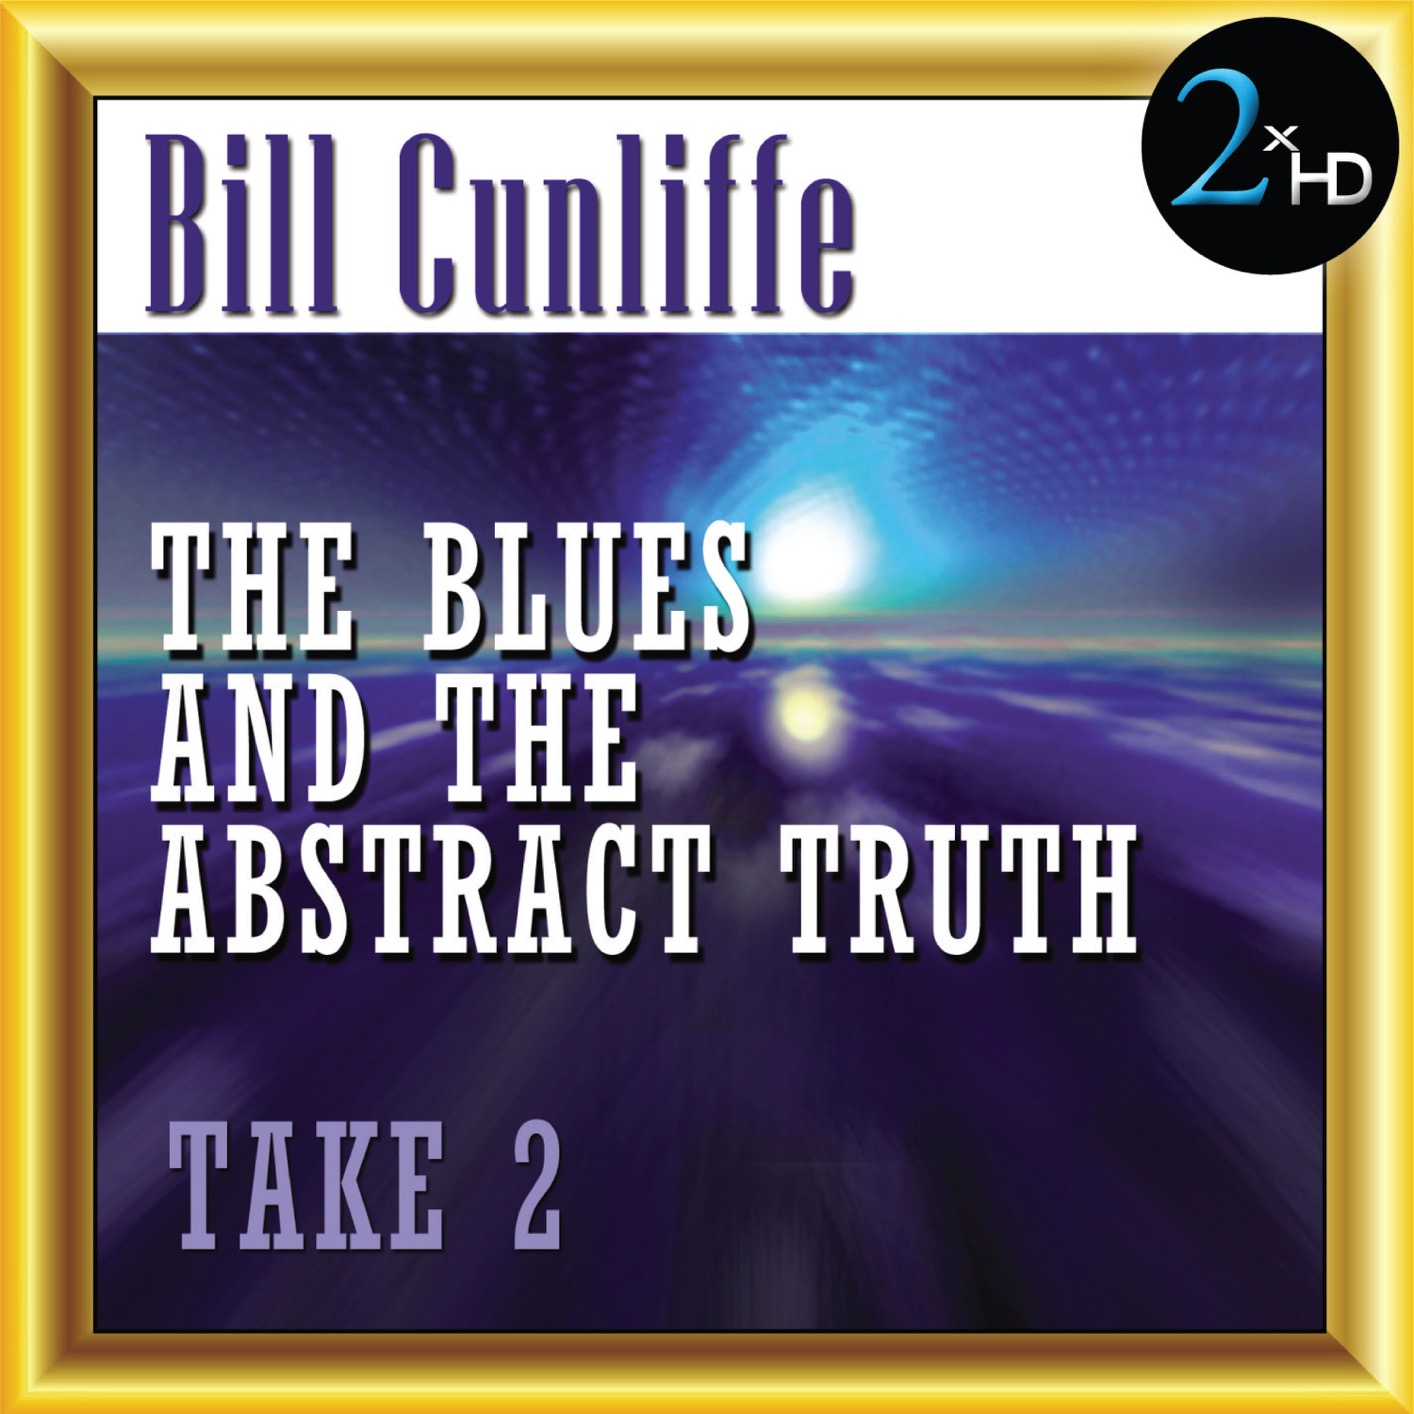 Bill Cunliffe – The Blues & The Abstract Truth: Take 2 (Remastered) (2017) [FLAC 24bit/44,1kHz]